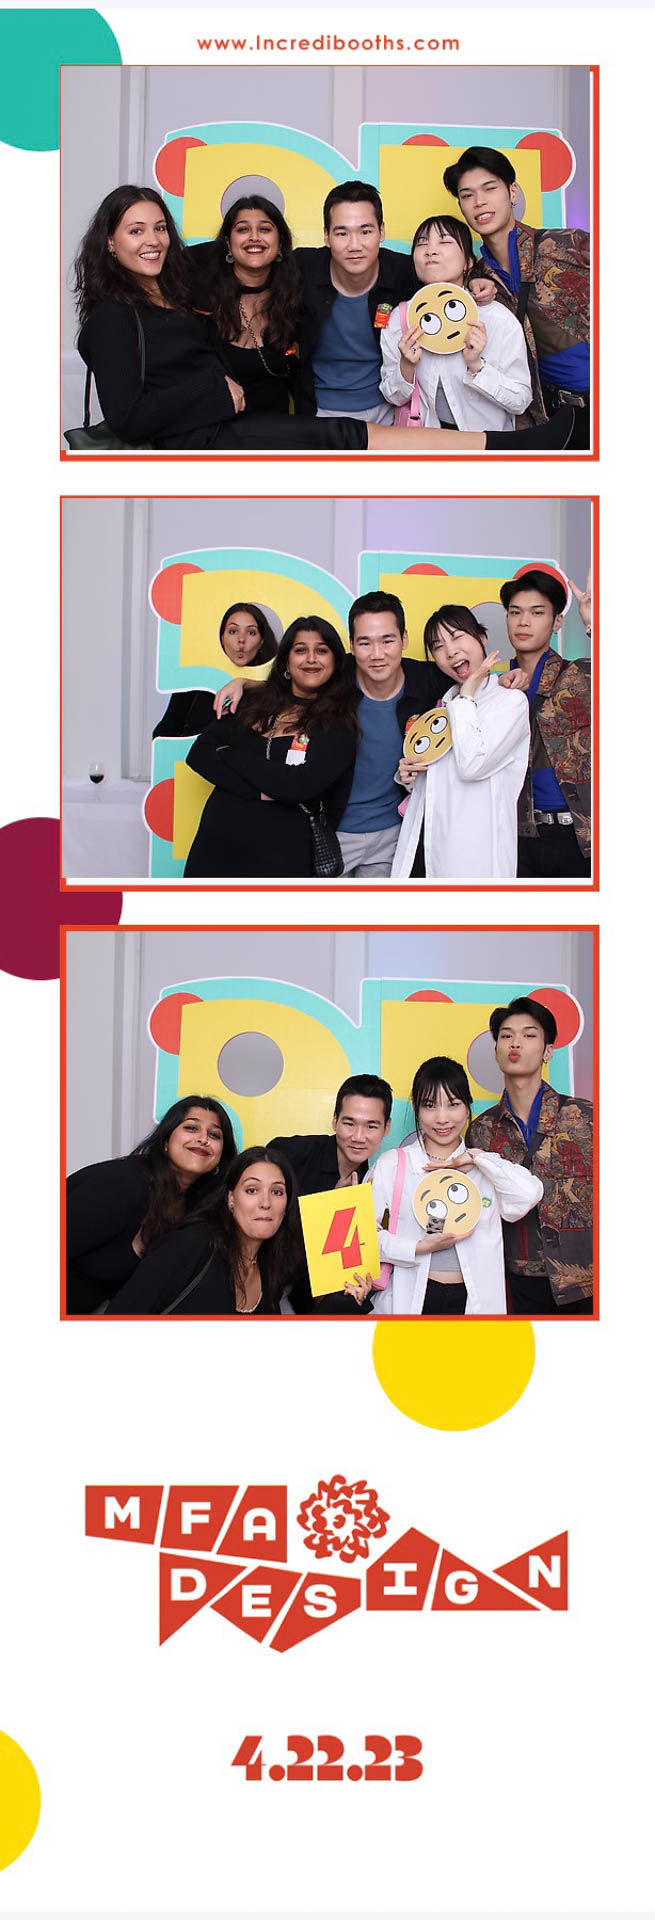 strip of 3 photos from a photo booth machine, people celebrating in front of a colorful sign